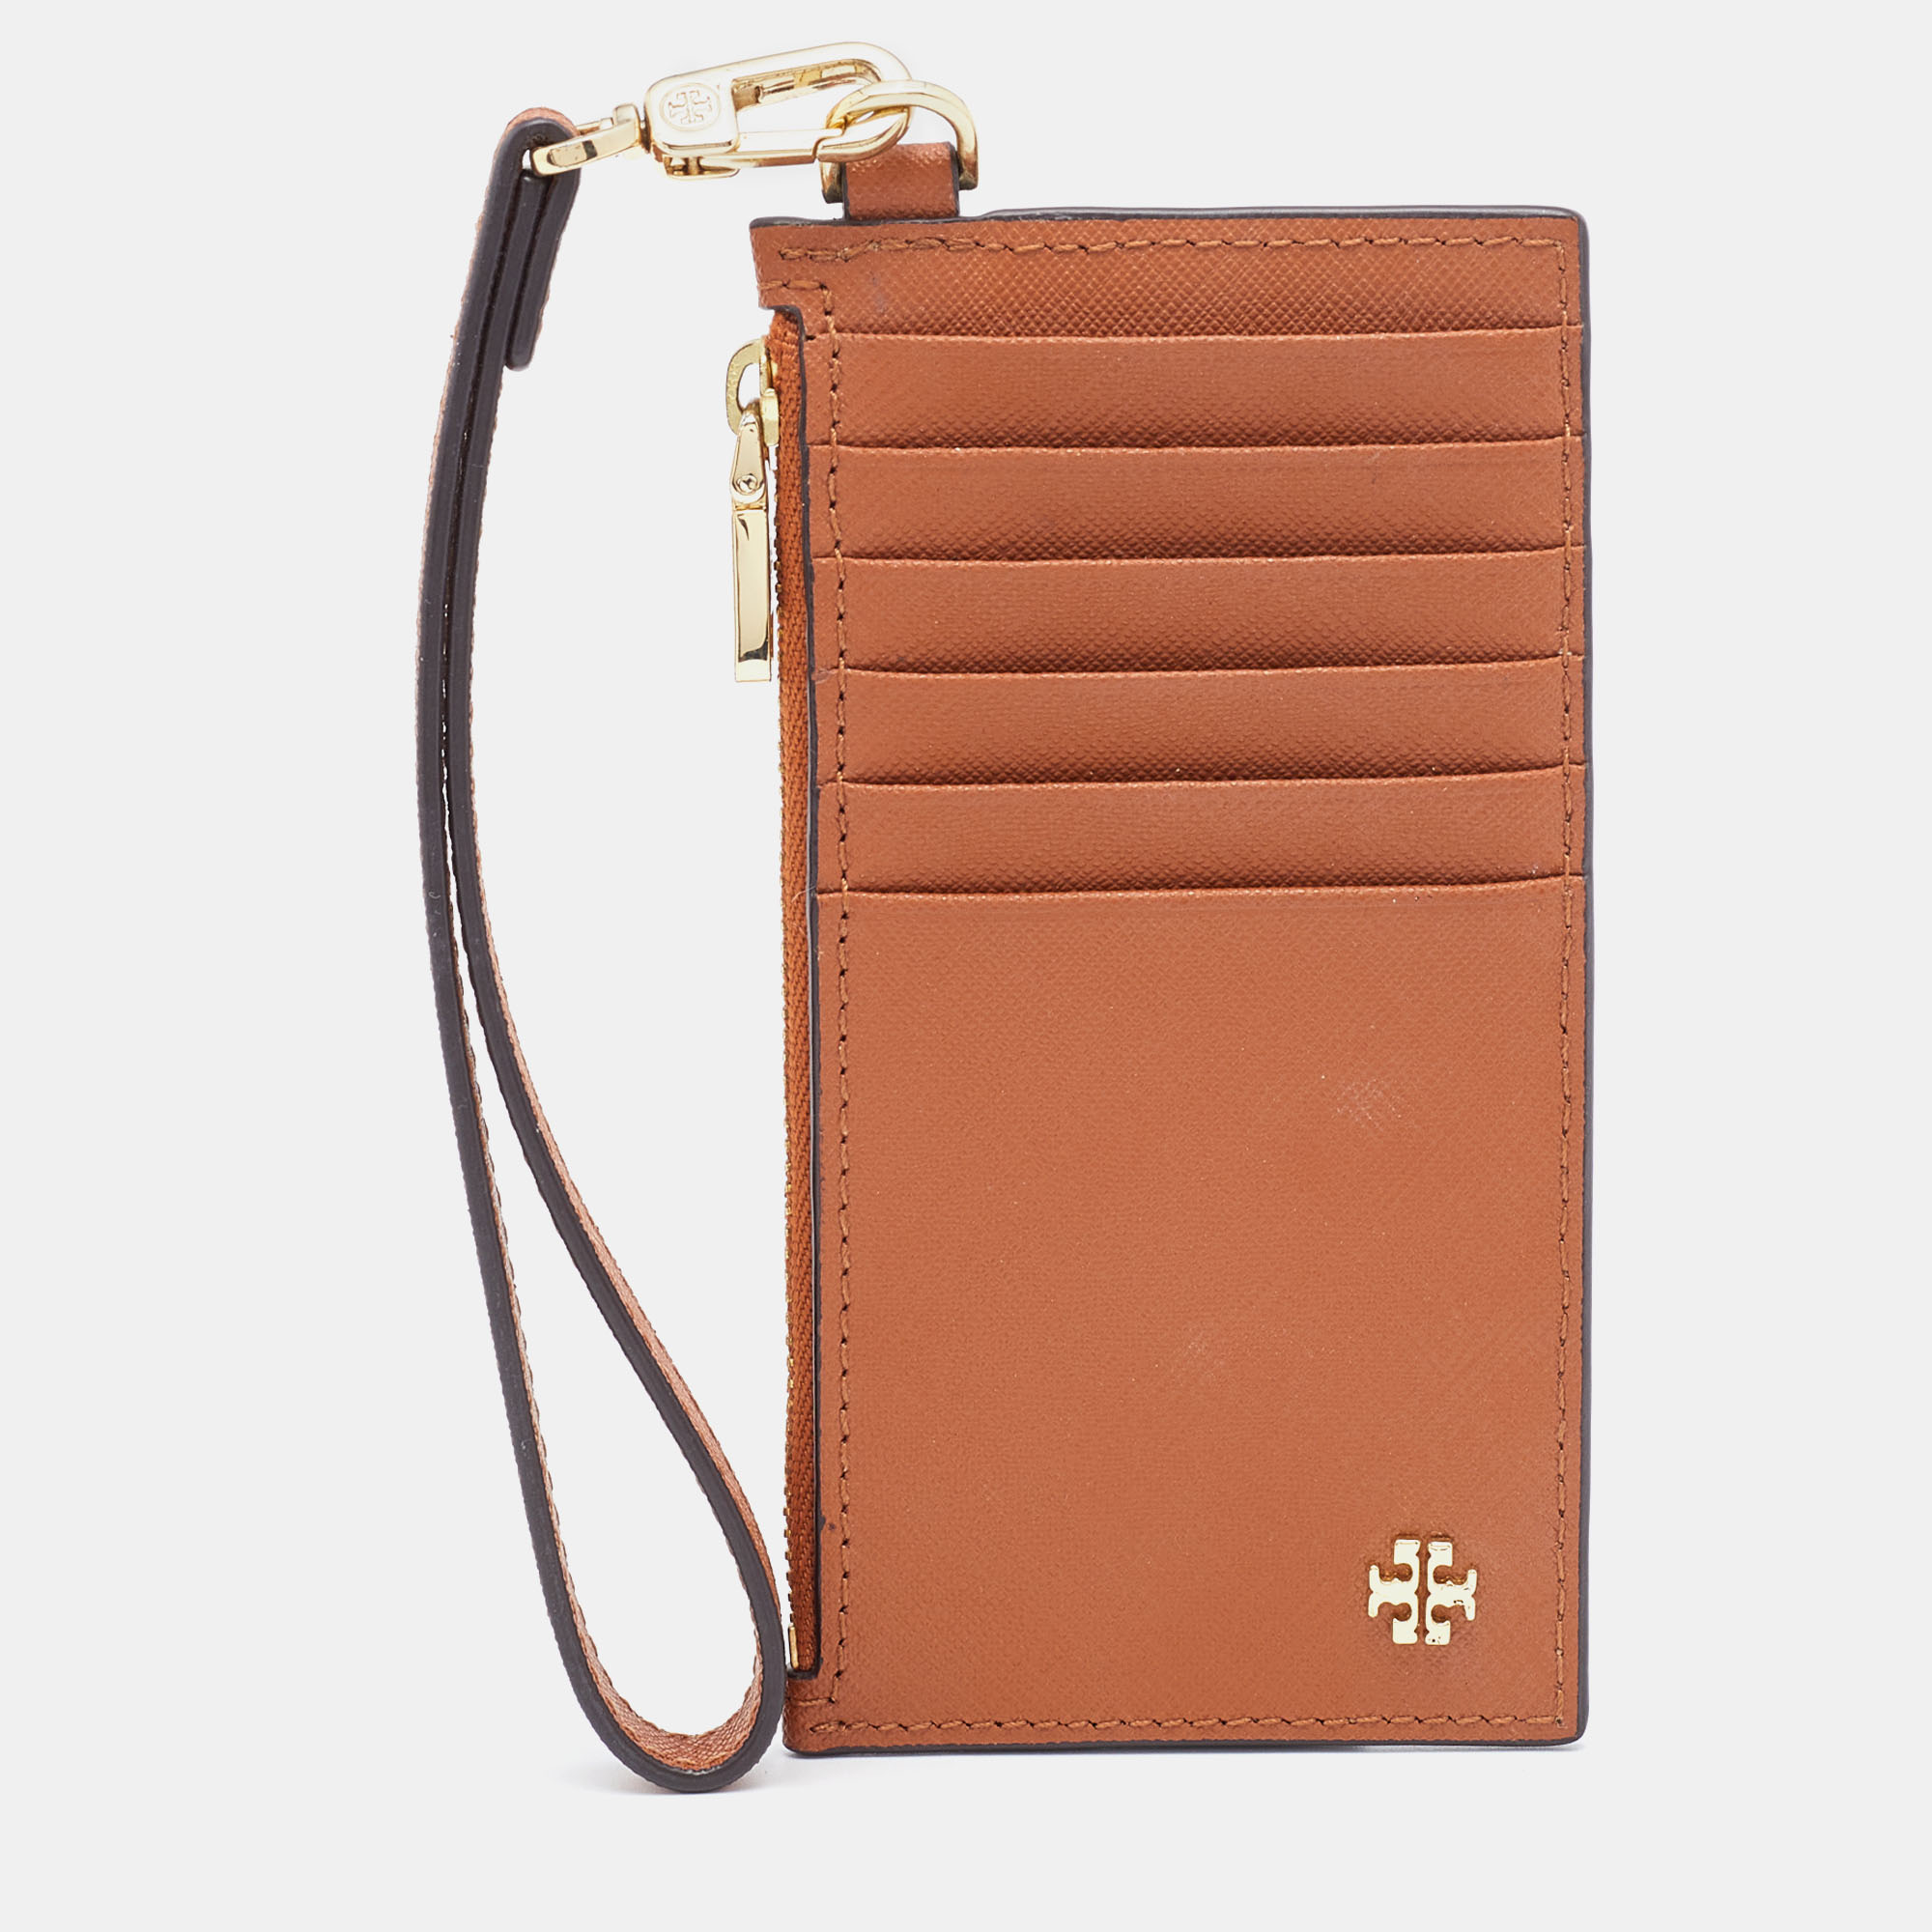 Pre-owned Tory Burch Brown Saffiano Leather Miller Top Zip Card Case